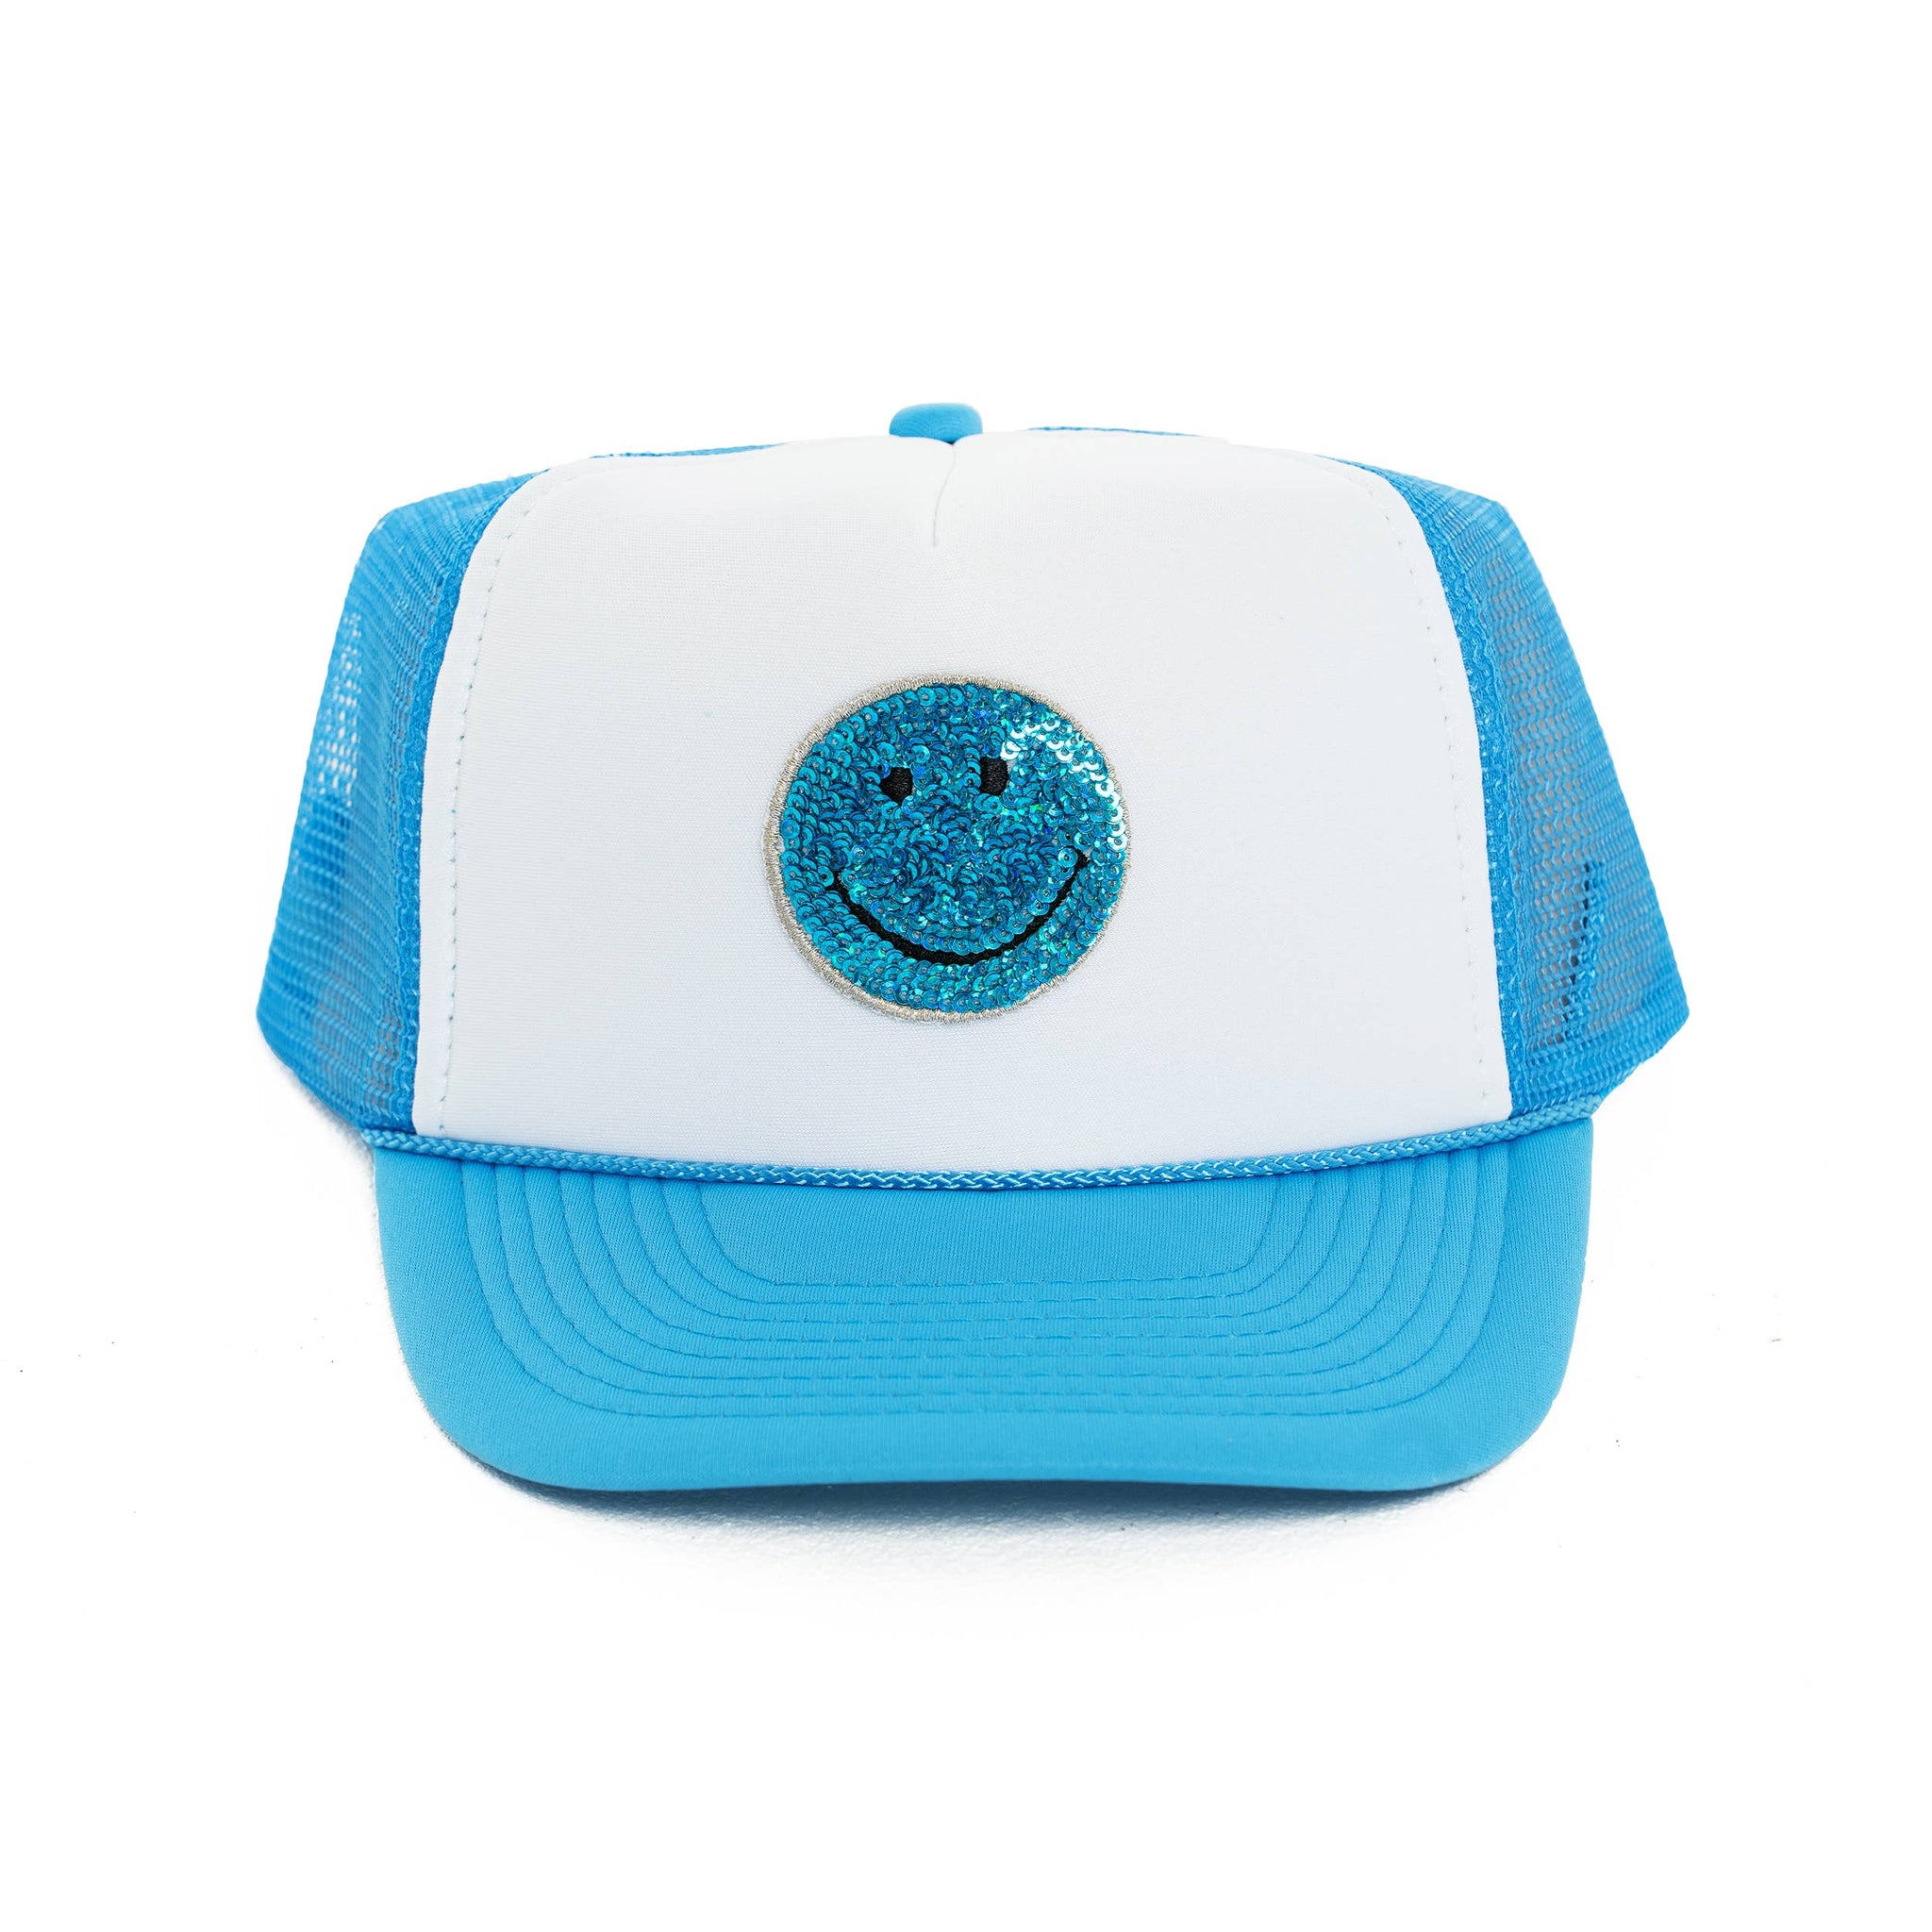 Trucker Hat w/ Smiley Face Patch for Kids